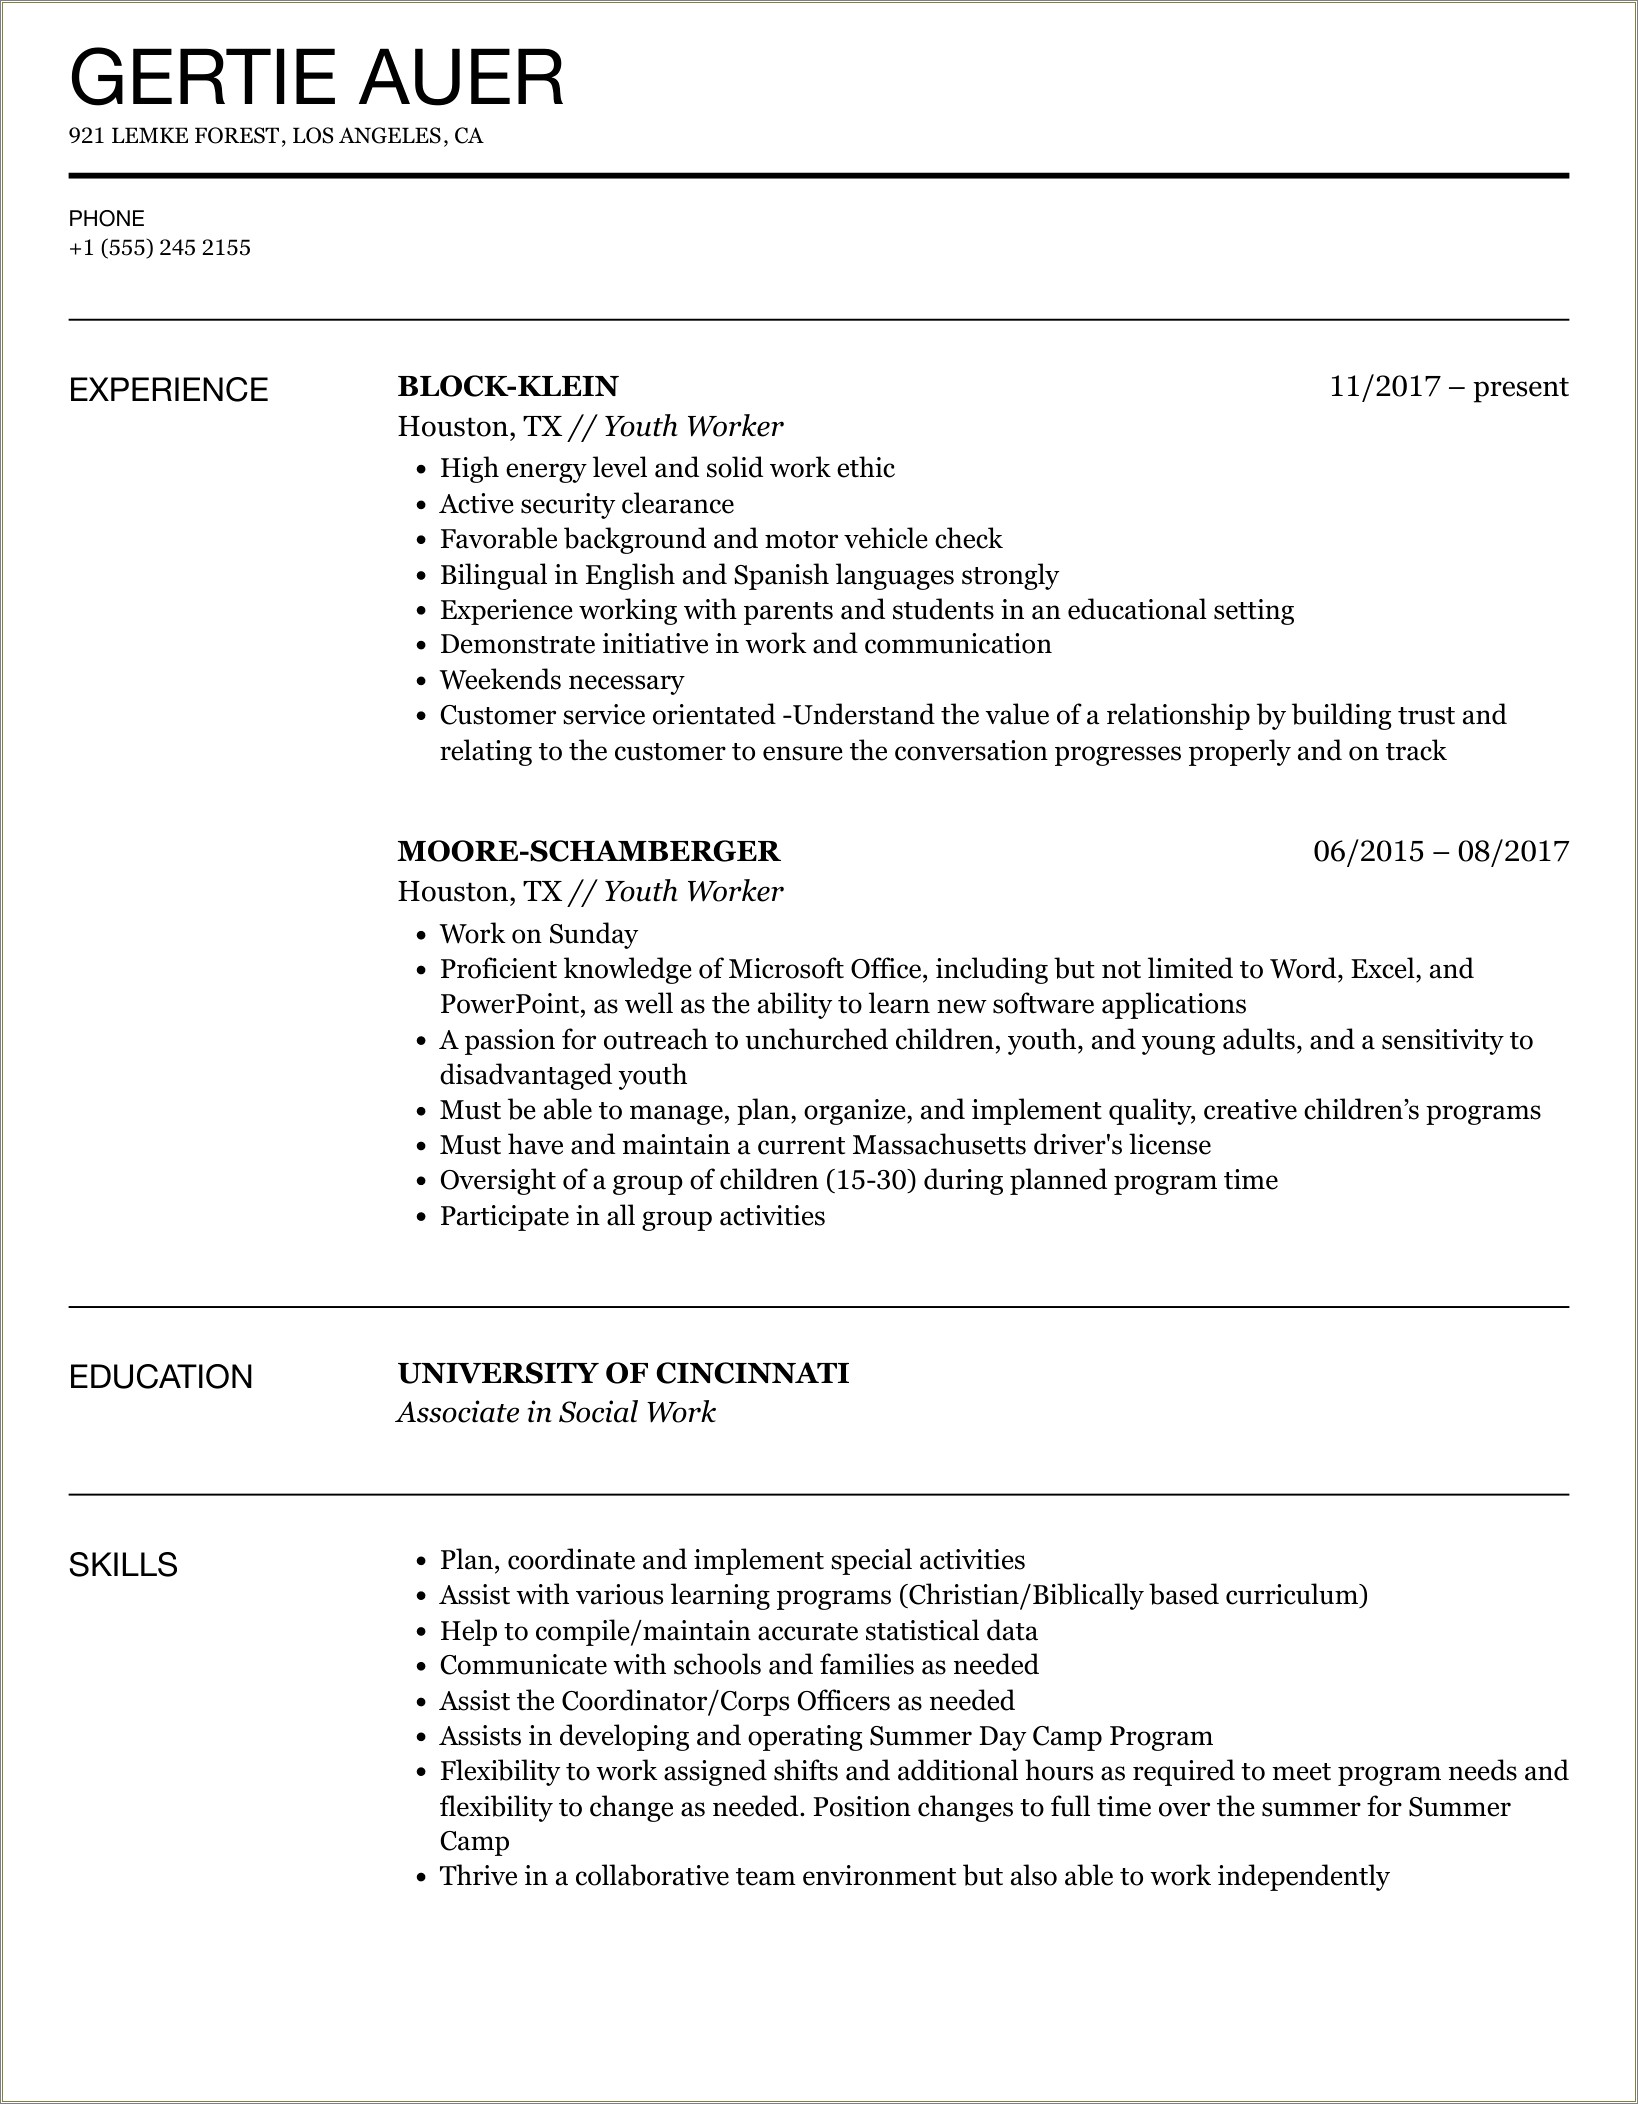 Sample Resumes On Working With Youth